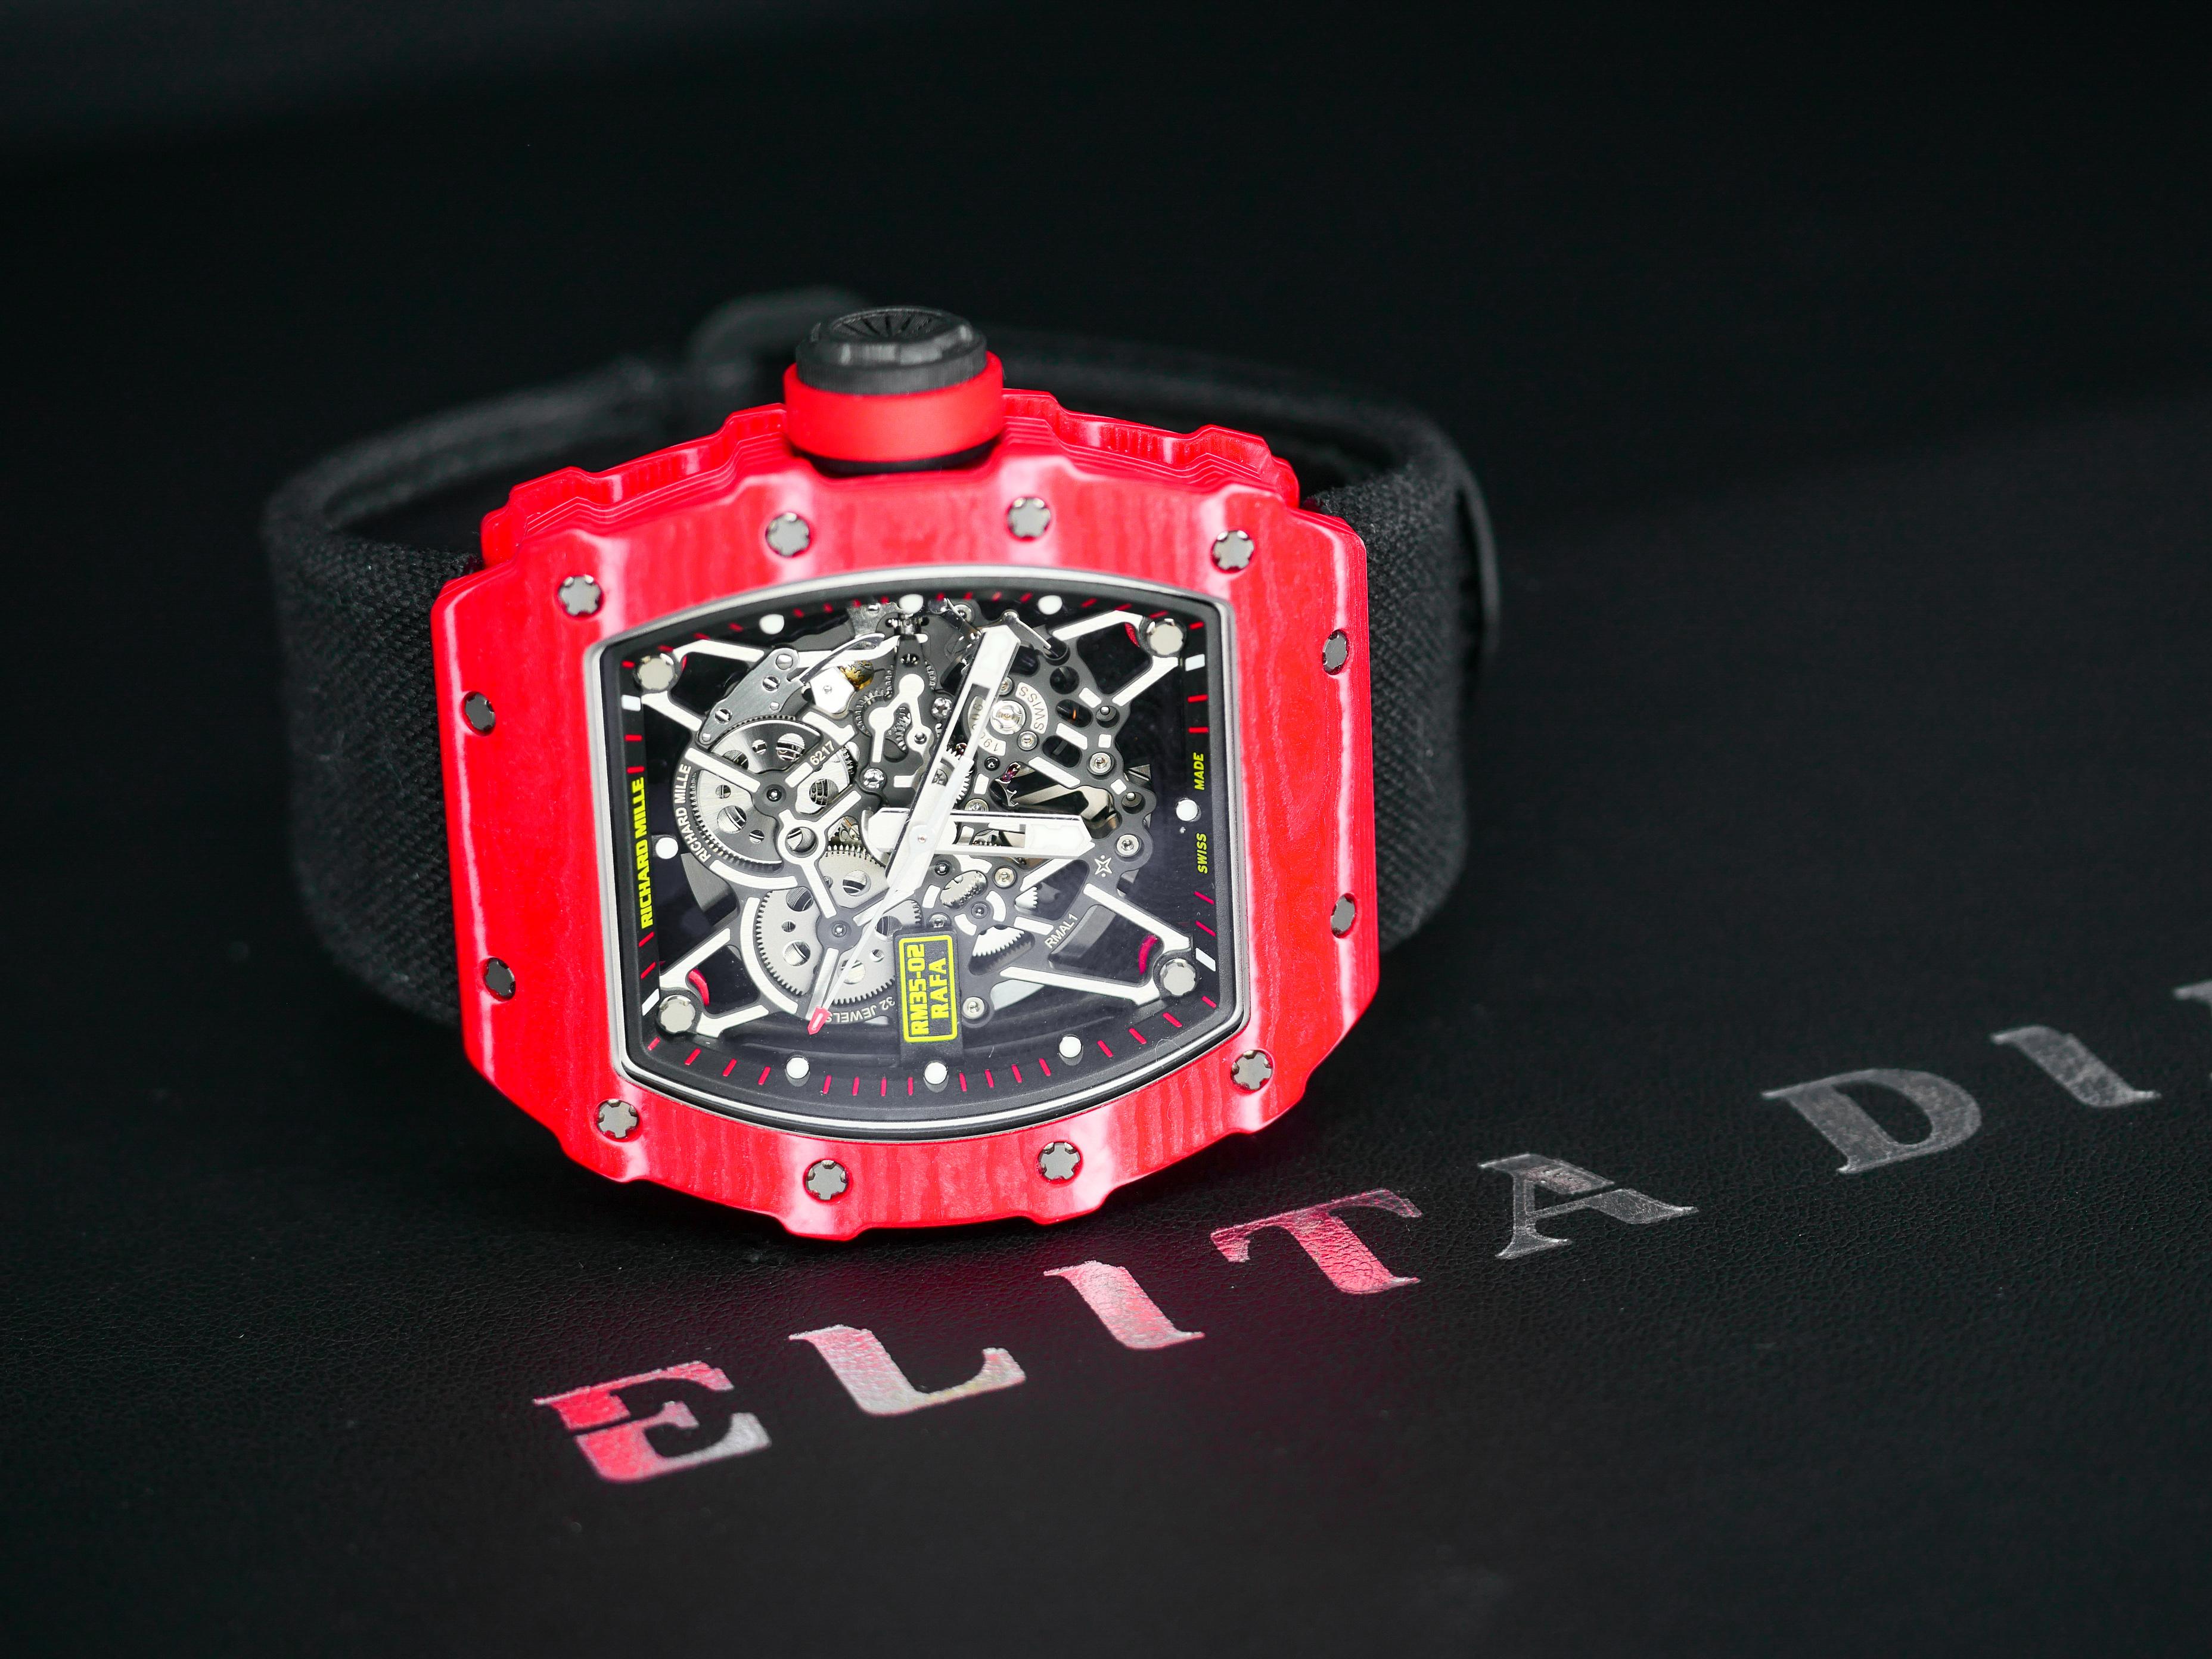 Richard Mille created this exotic watch for tennis superstar Rafael Nadal in red Quartz-TPT,  an exclusive material made only for Richard Mille. 

The case measures 49.94 mm at the case center and 44.5 mm where the strap connects. The scratch and